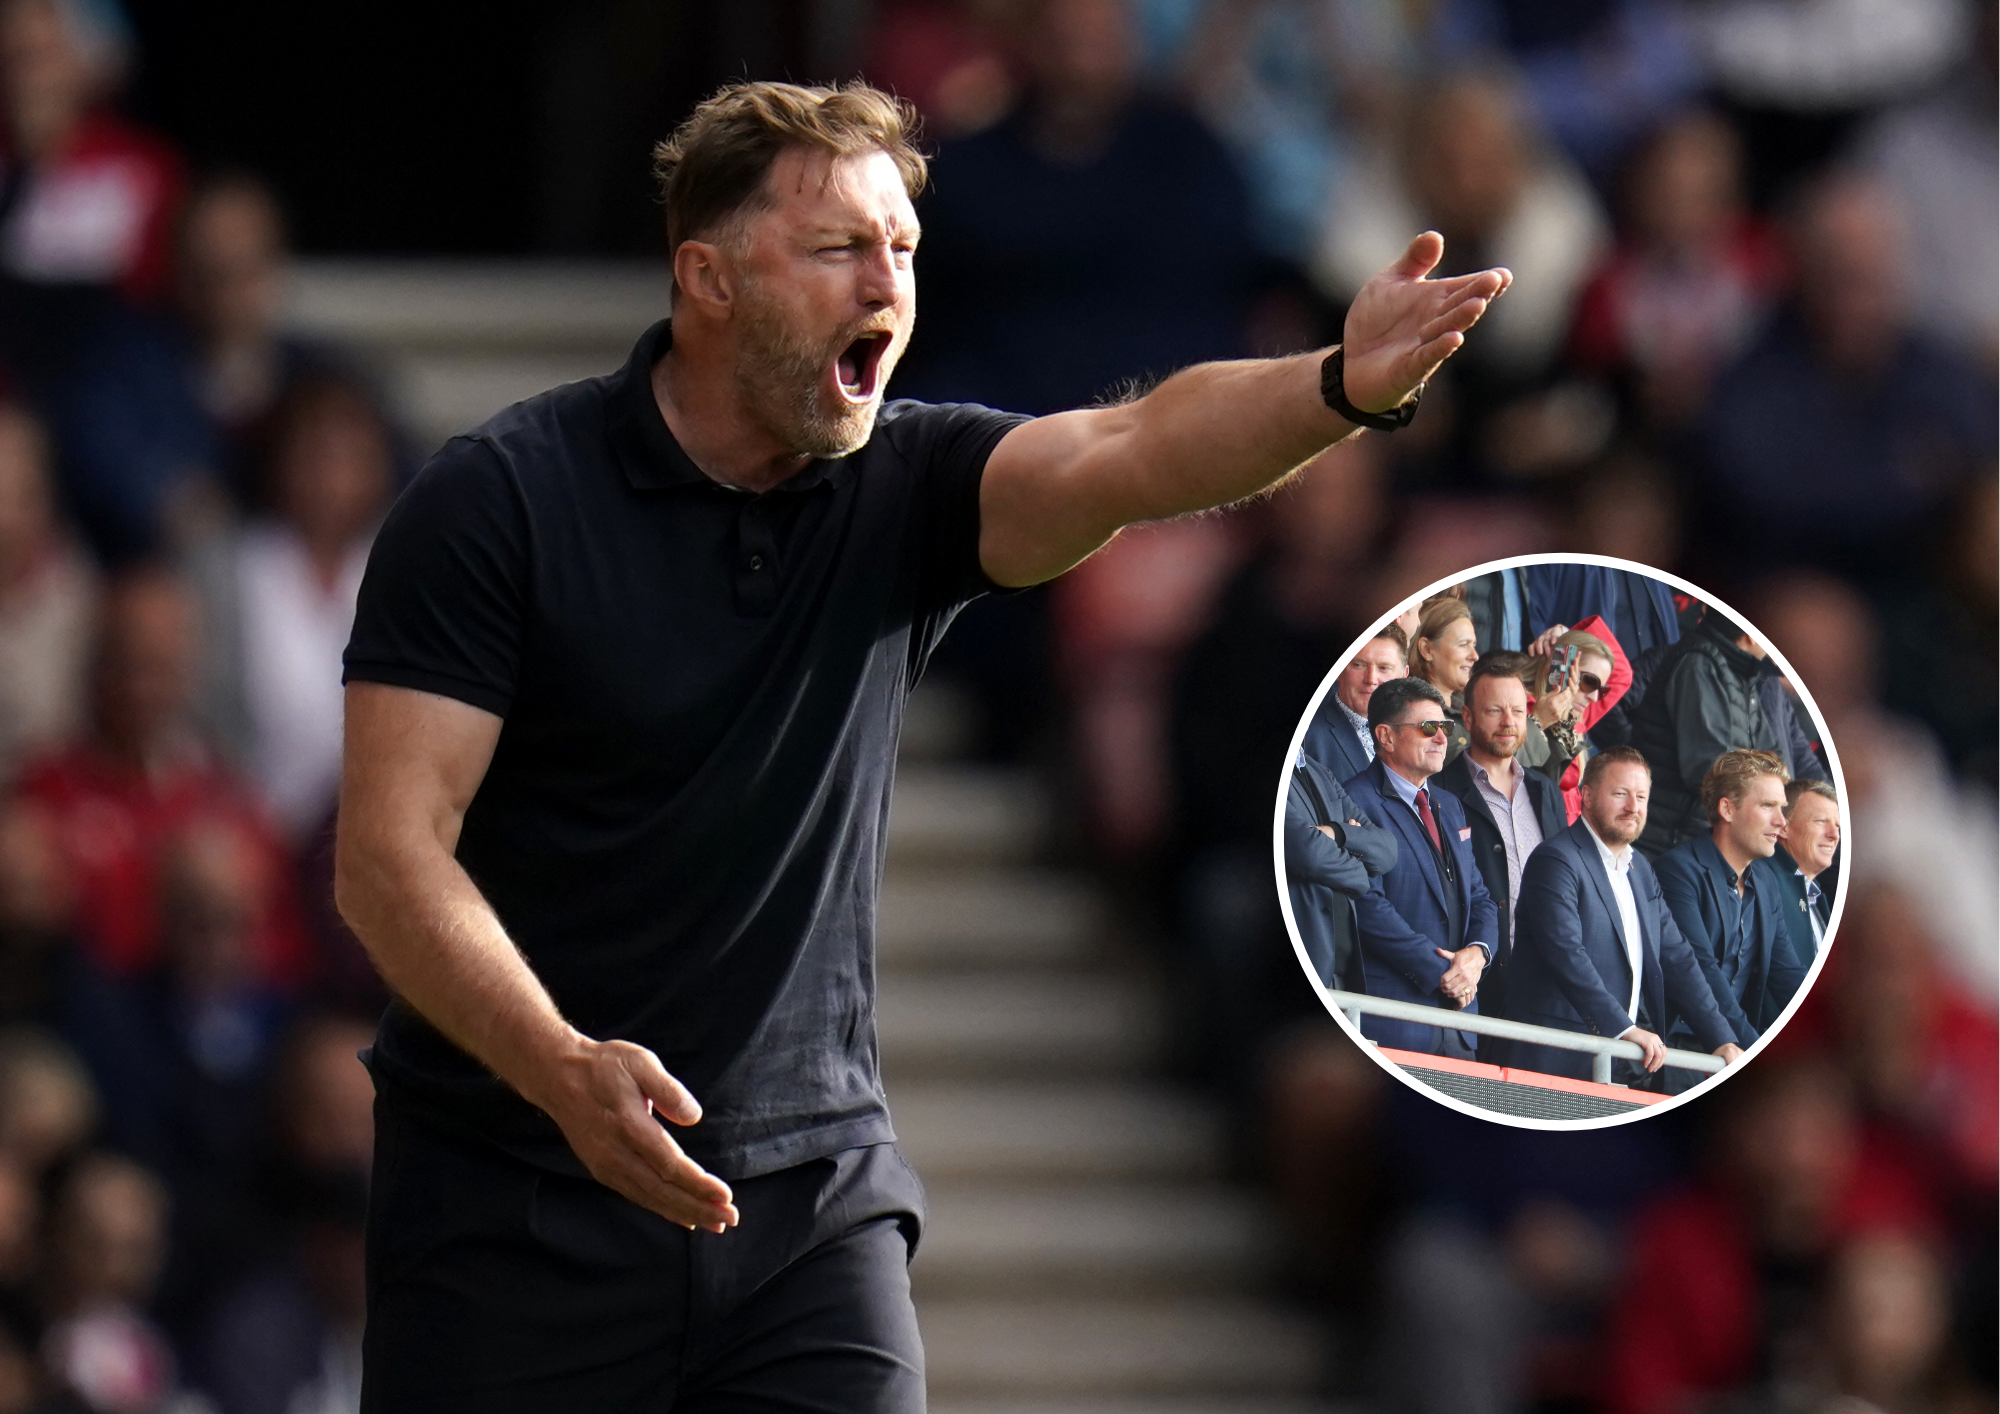 What Southampton fans are saying about Hasenhuttl's future as manager